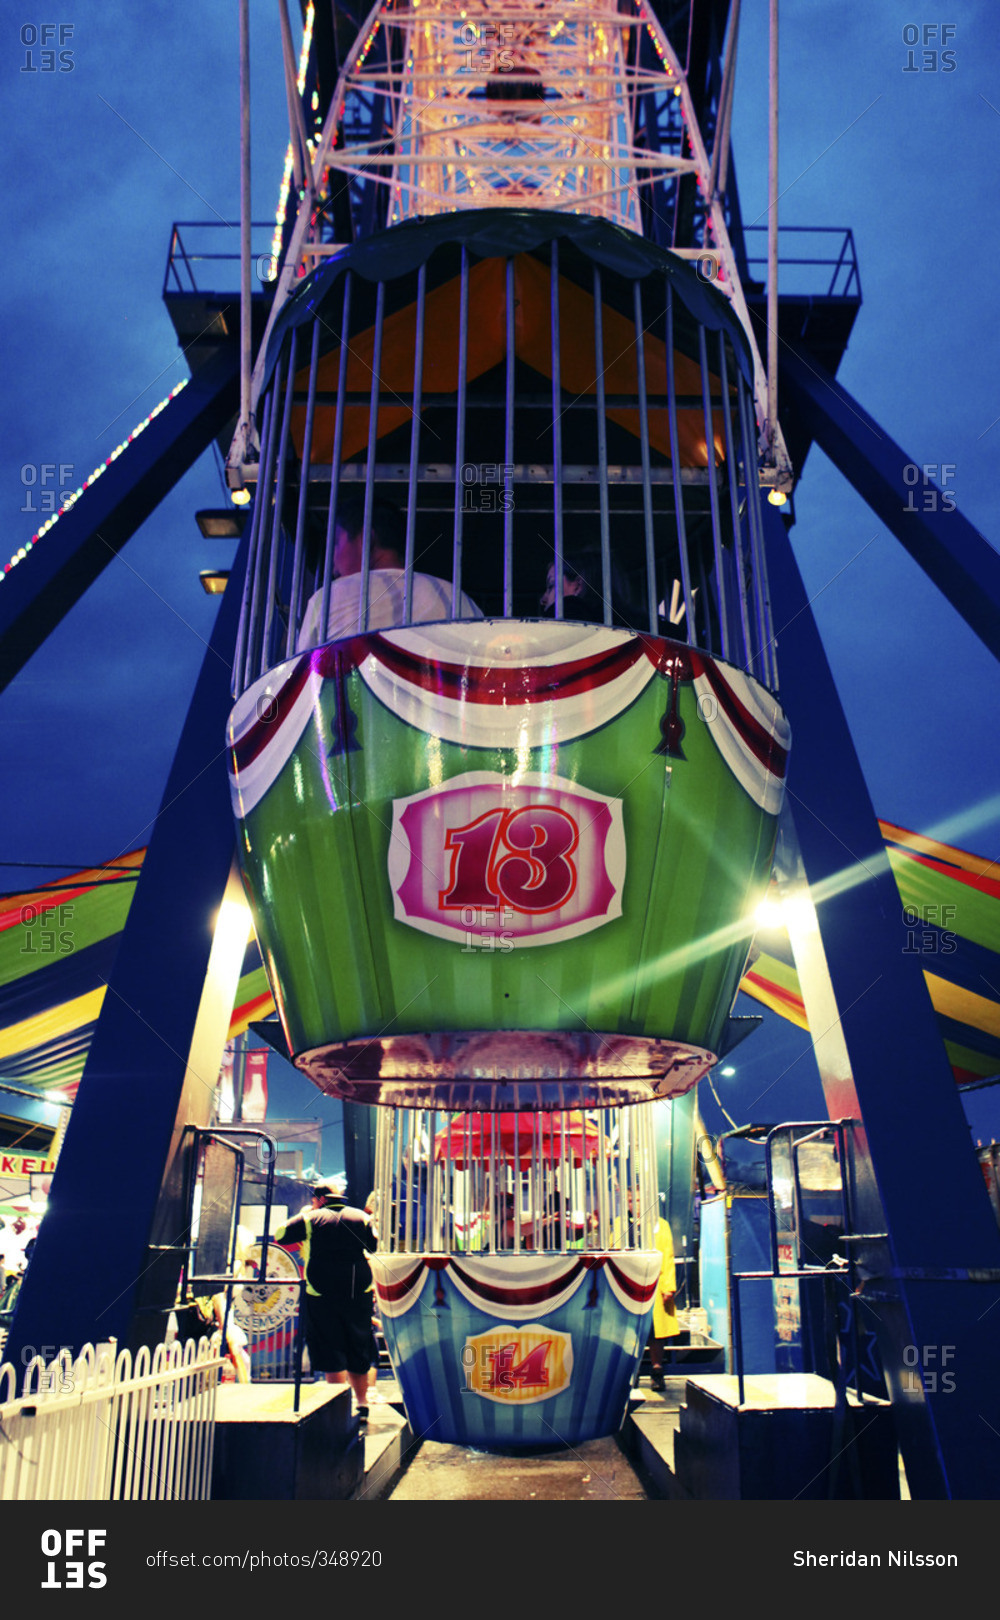 People riding in a carnival bucket ride at dusk